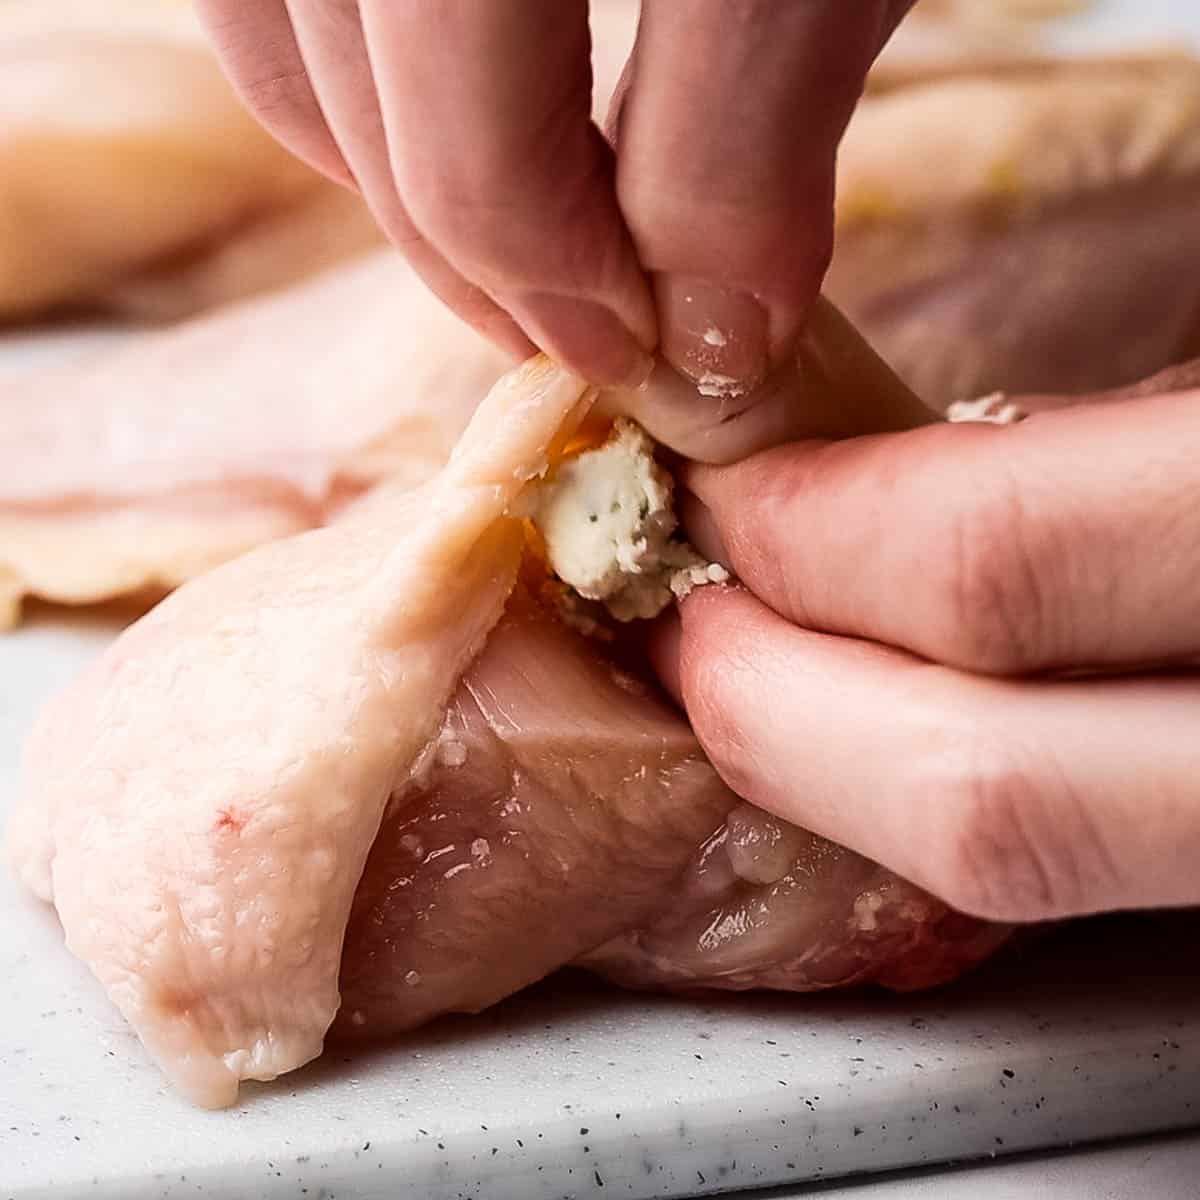 stuffing the chicken breast with boursin cheese